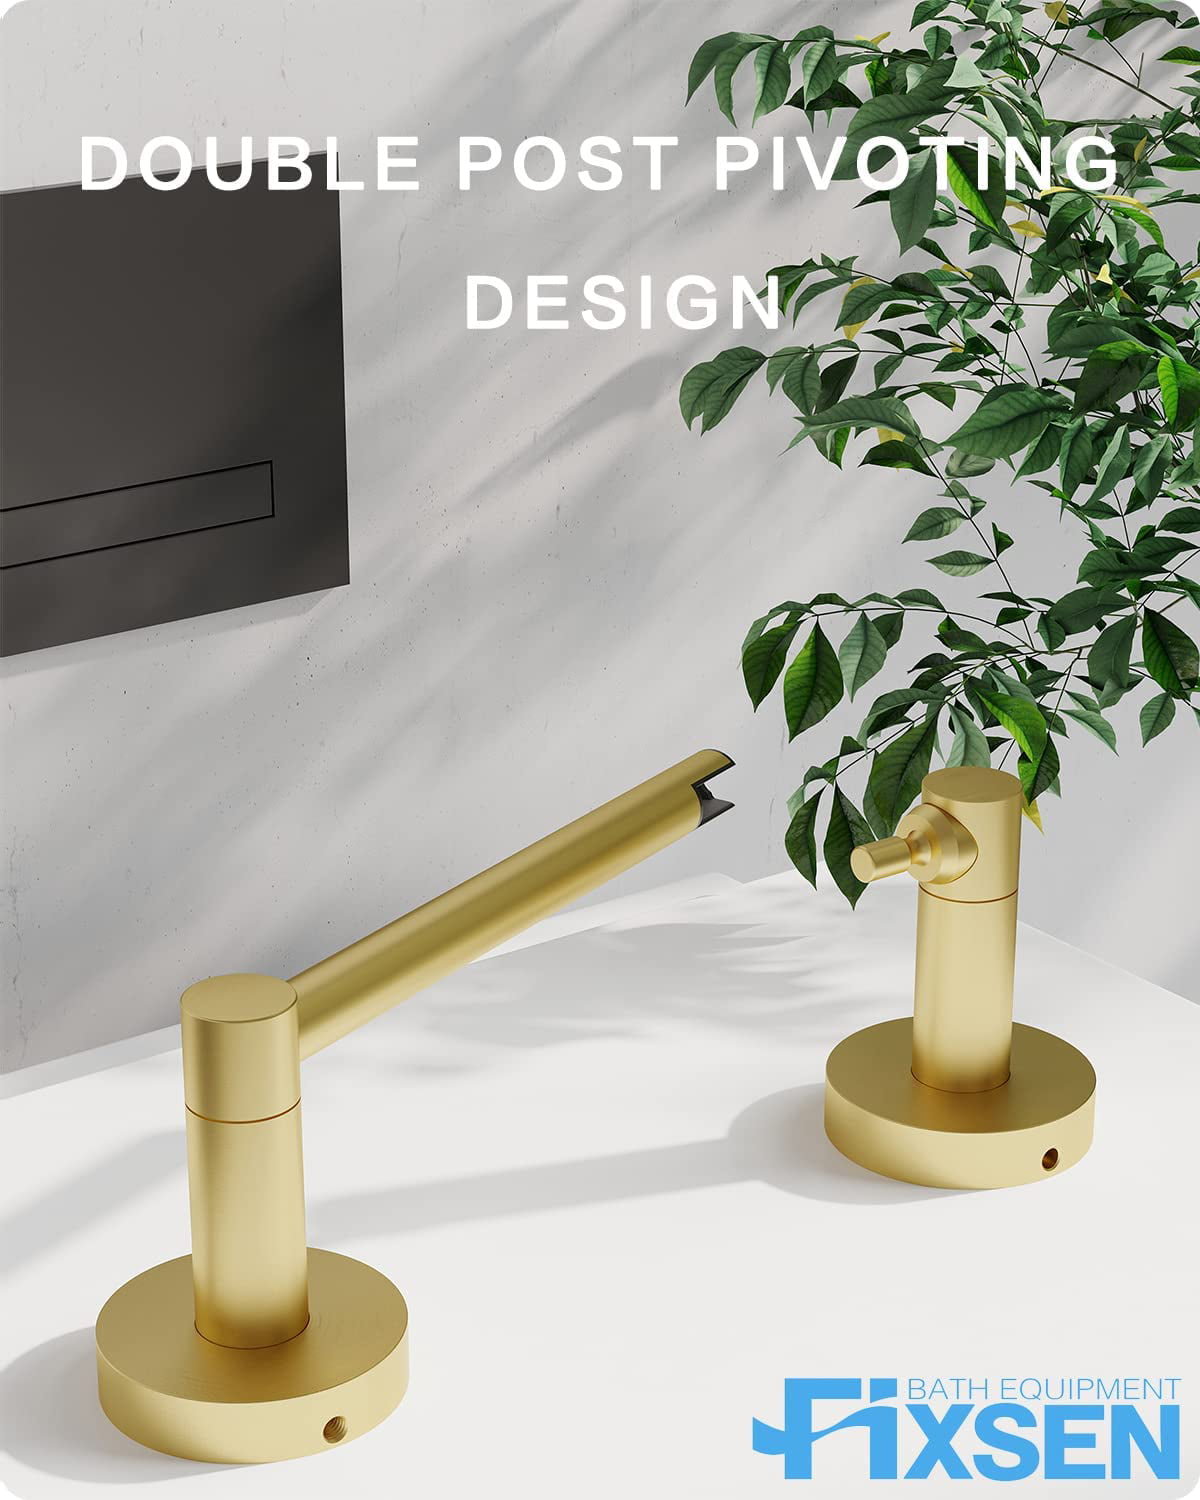 FORIOUS Wall Mount Post Toilet Paper Holder in Gold HH12401G